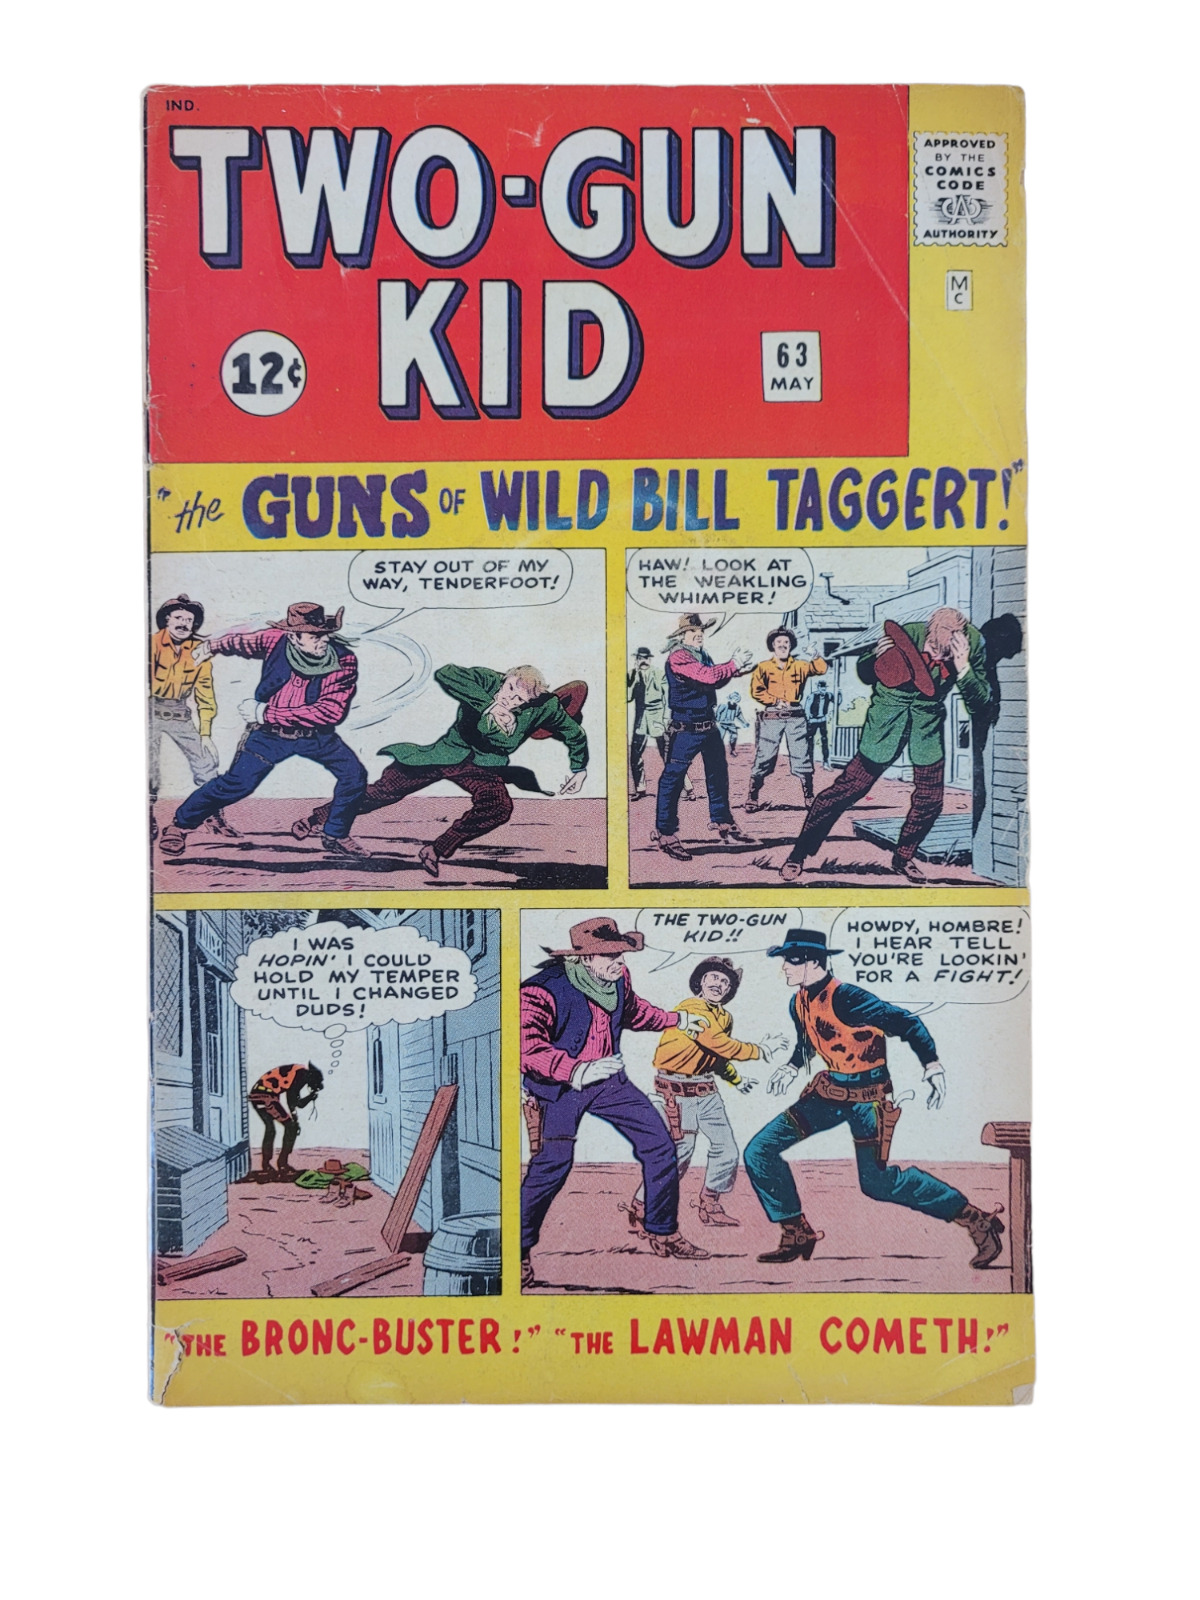 Two-Gun Kid #63 1963 Jack Kirby Cover Ayers + Lee  Silver Age Western Comics